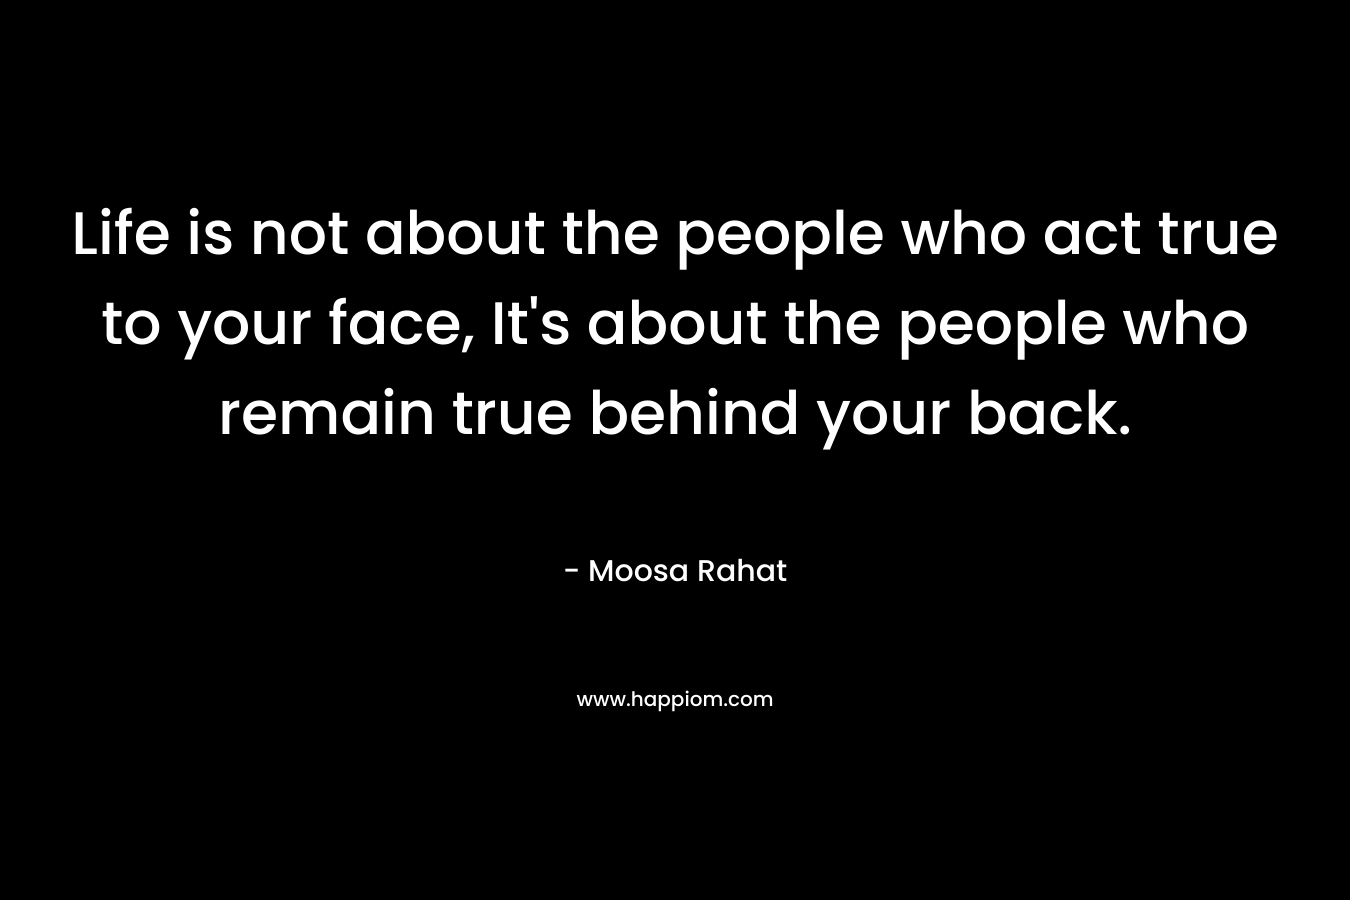 Life is not about the people who act true to your face, It’s about the people who remain true behind your back. – Moosa Rahat